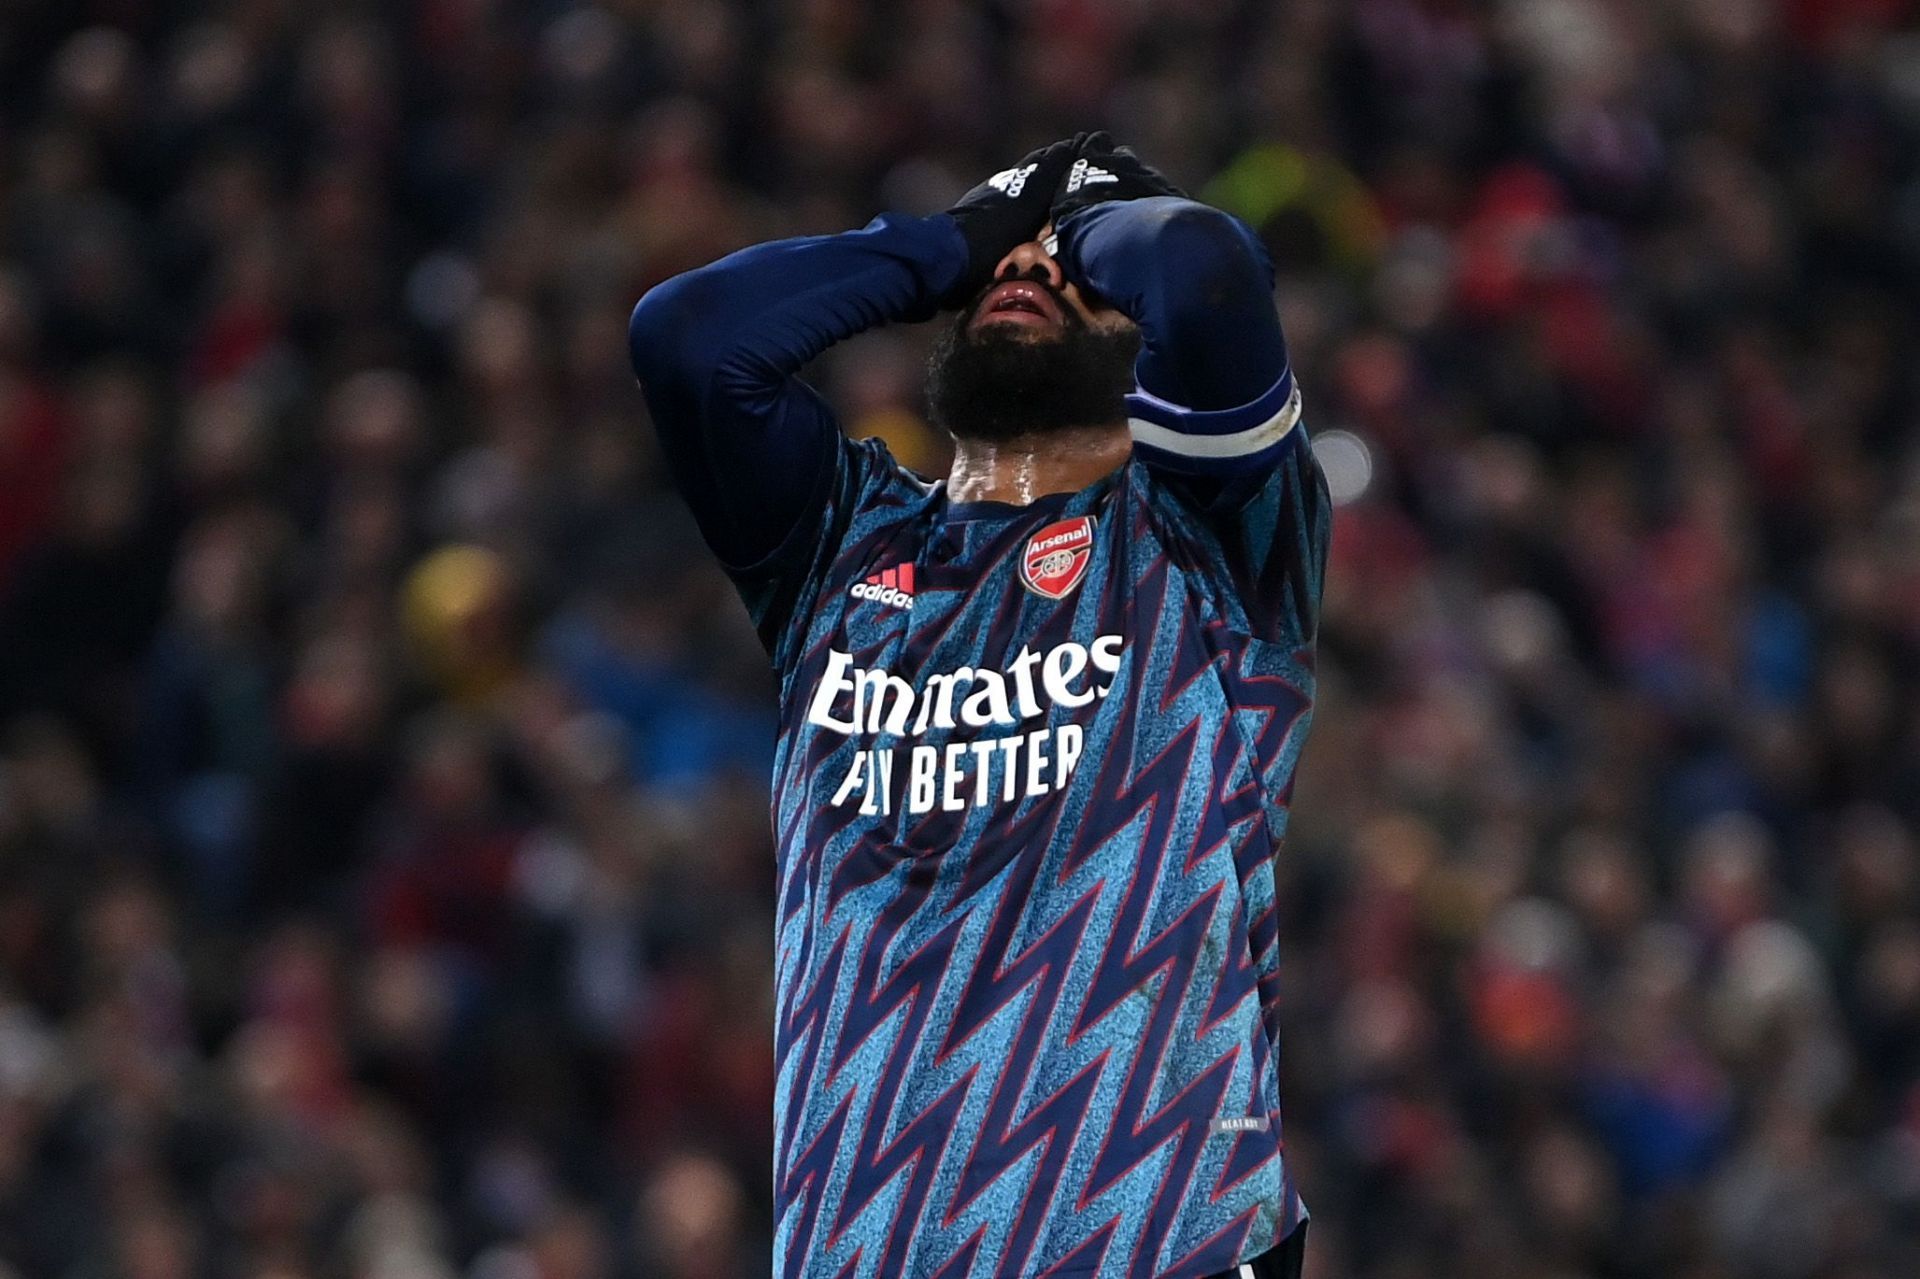 Alexandre Lacazette had a night to forget.